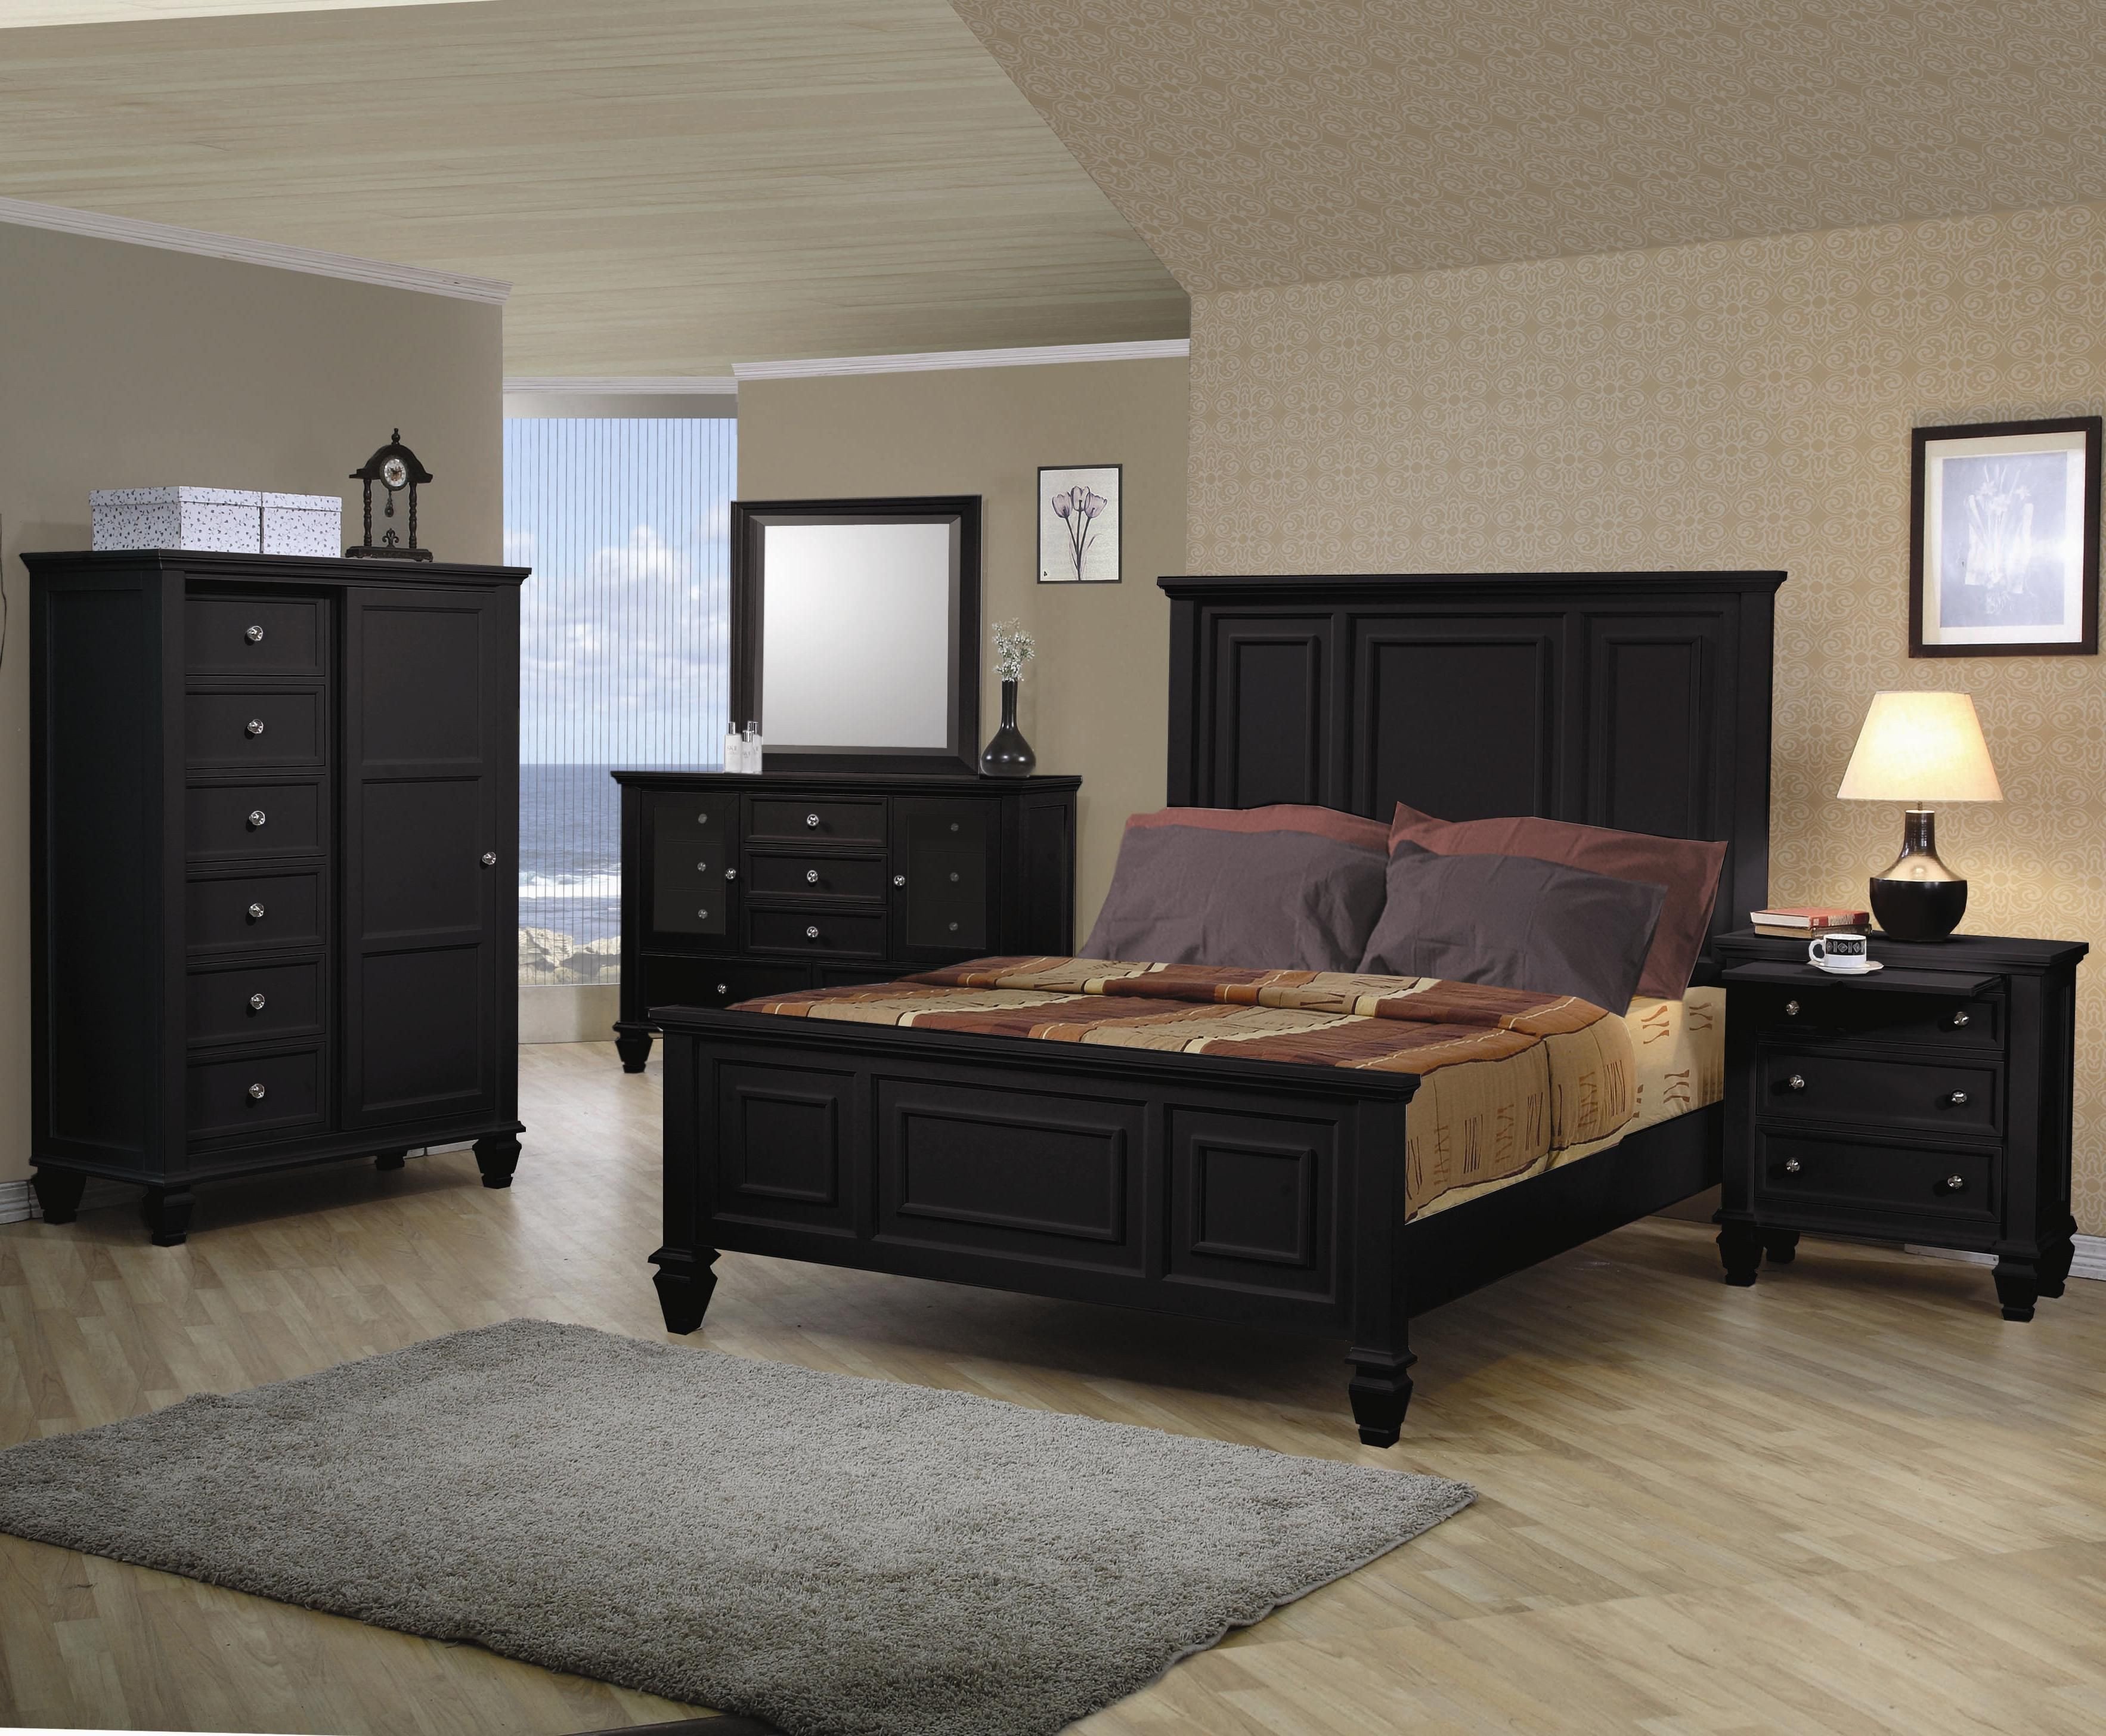 Broyhill King Bedroom Set Beautiful Pin On for the Bedroom